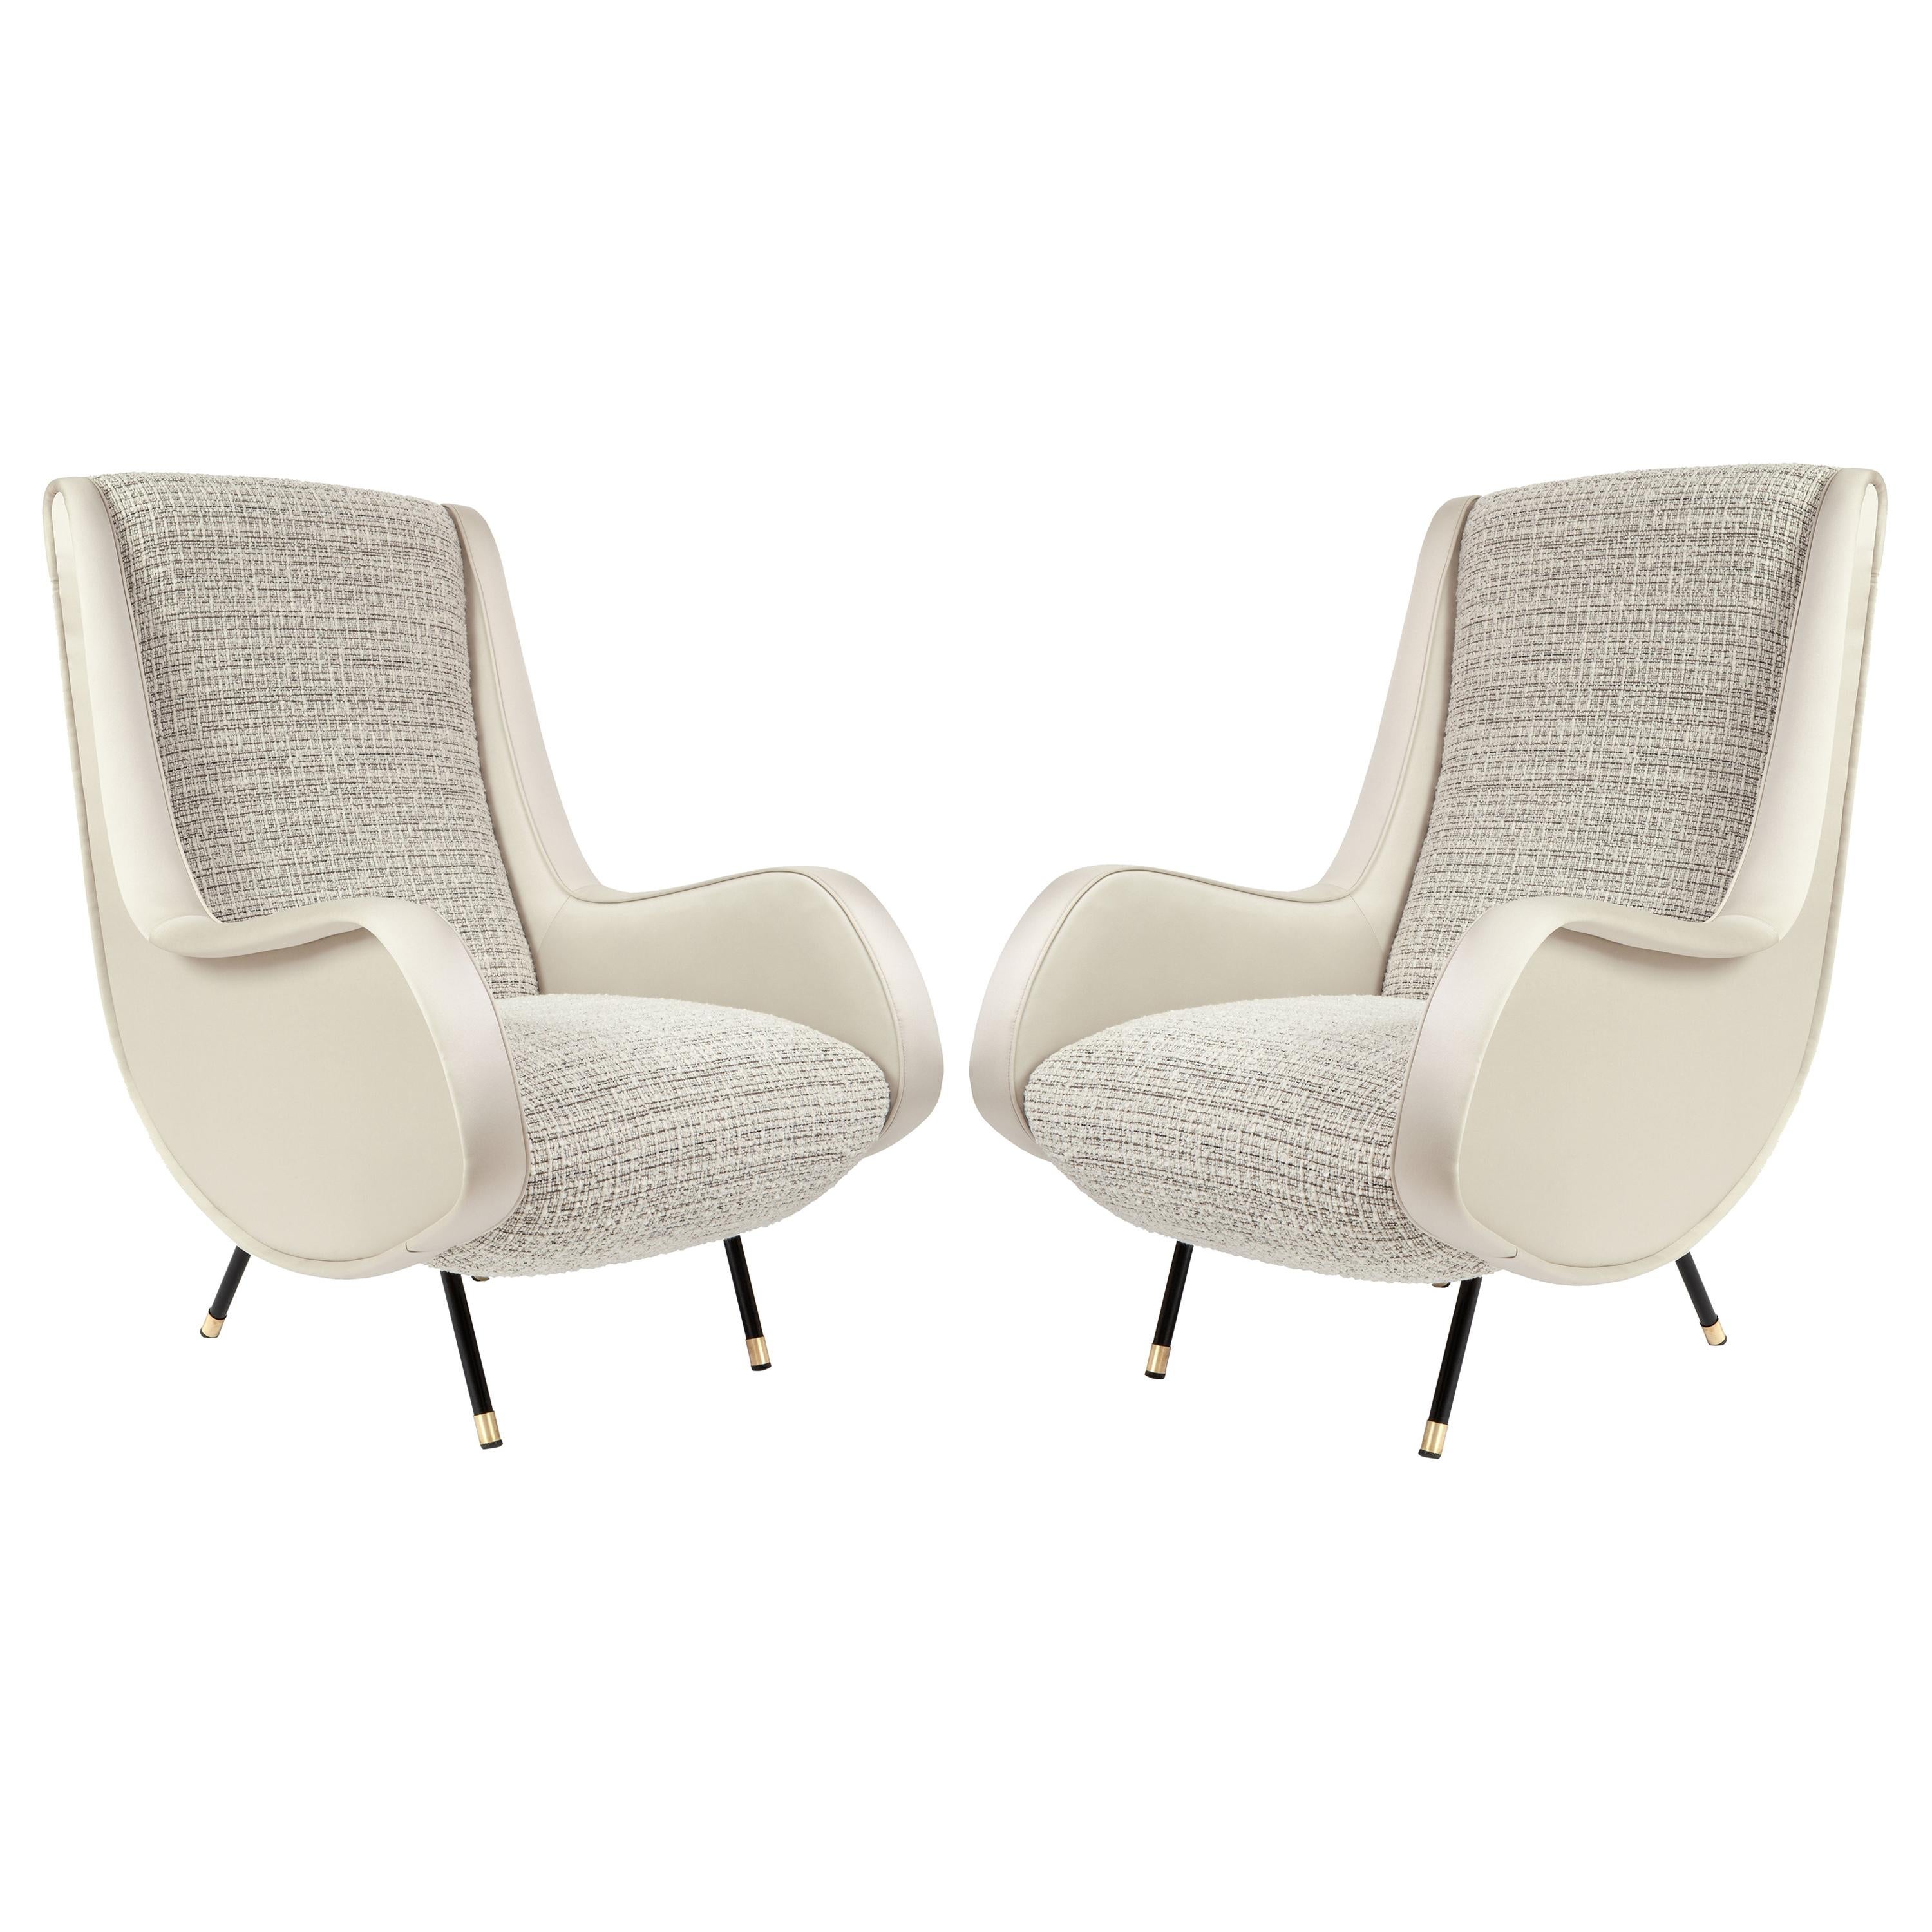 Pair of Armchairs from the 1960s with Dedar & Toyine Sellers Upholstery